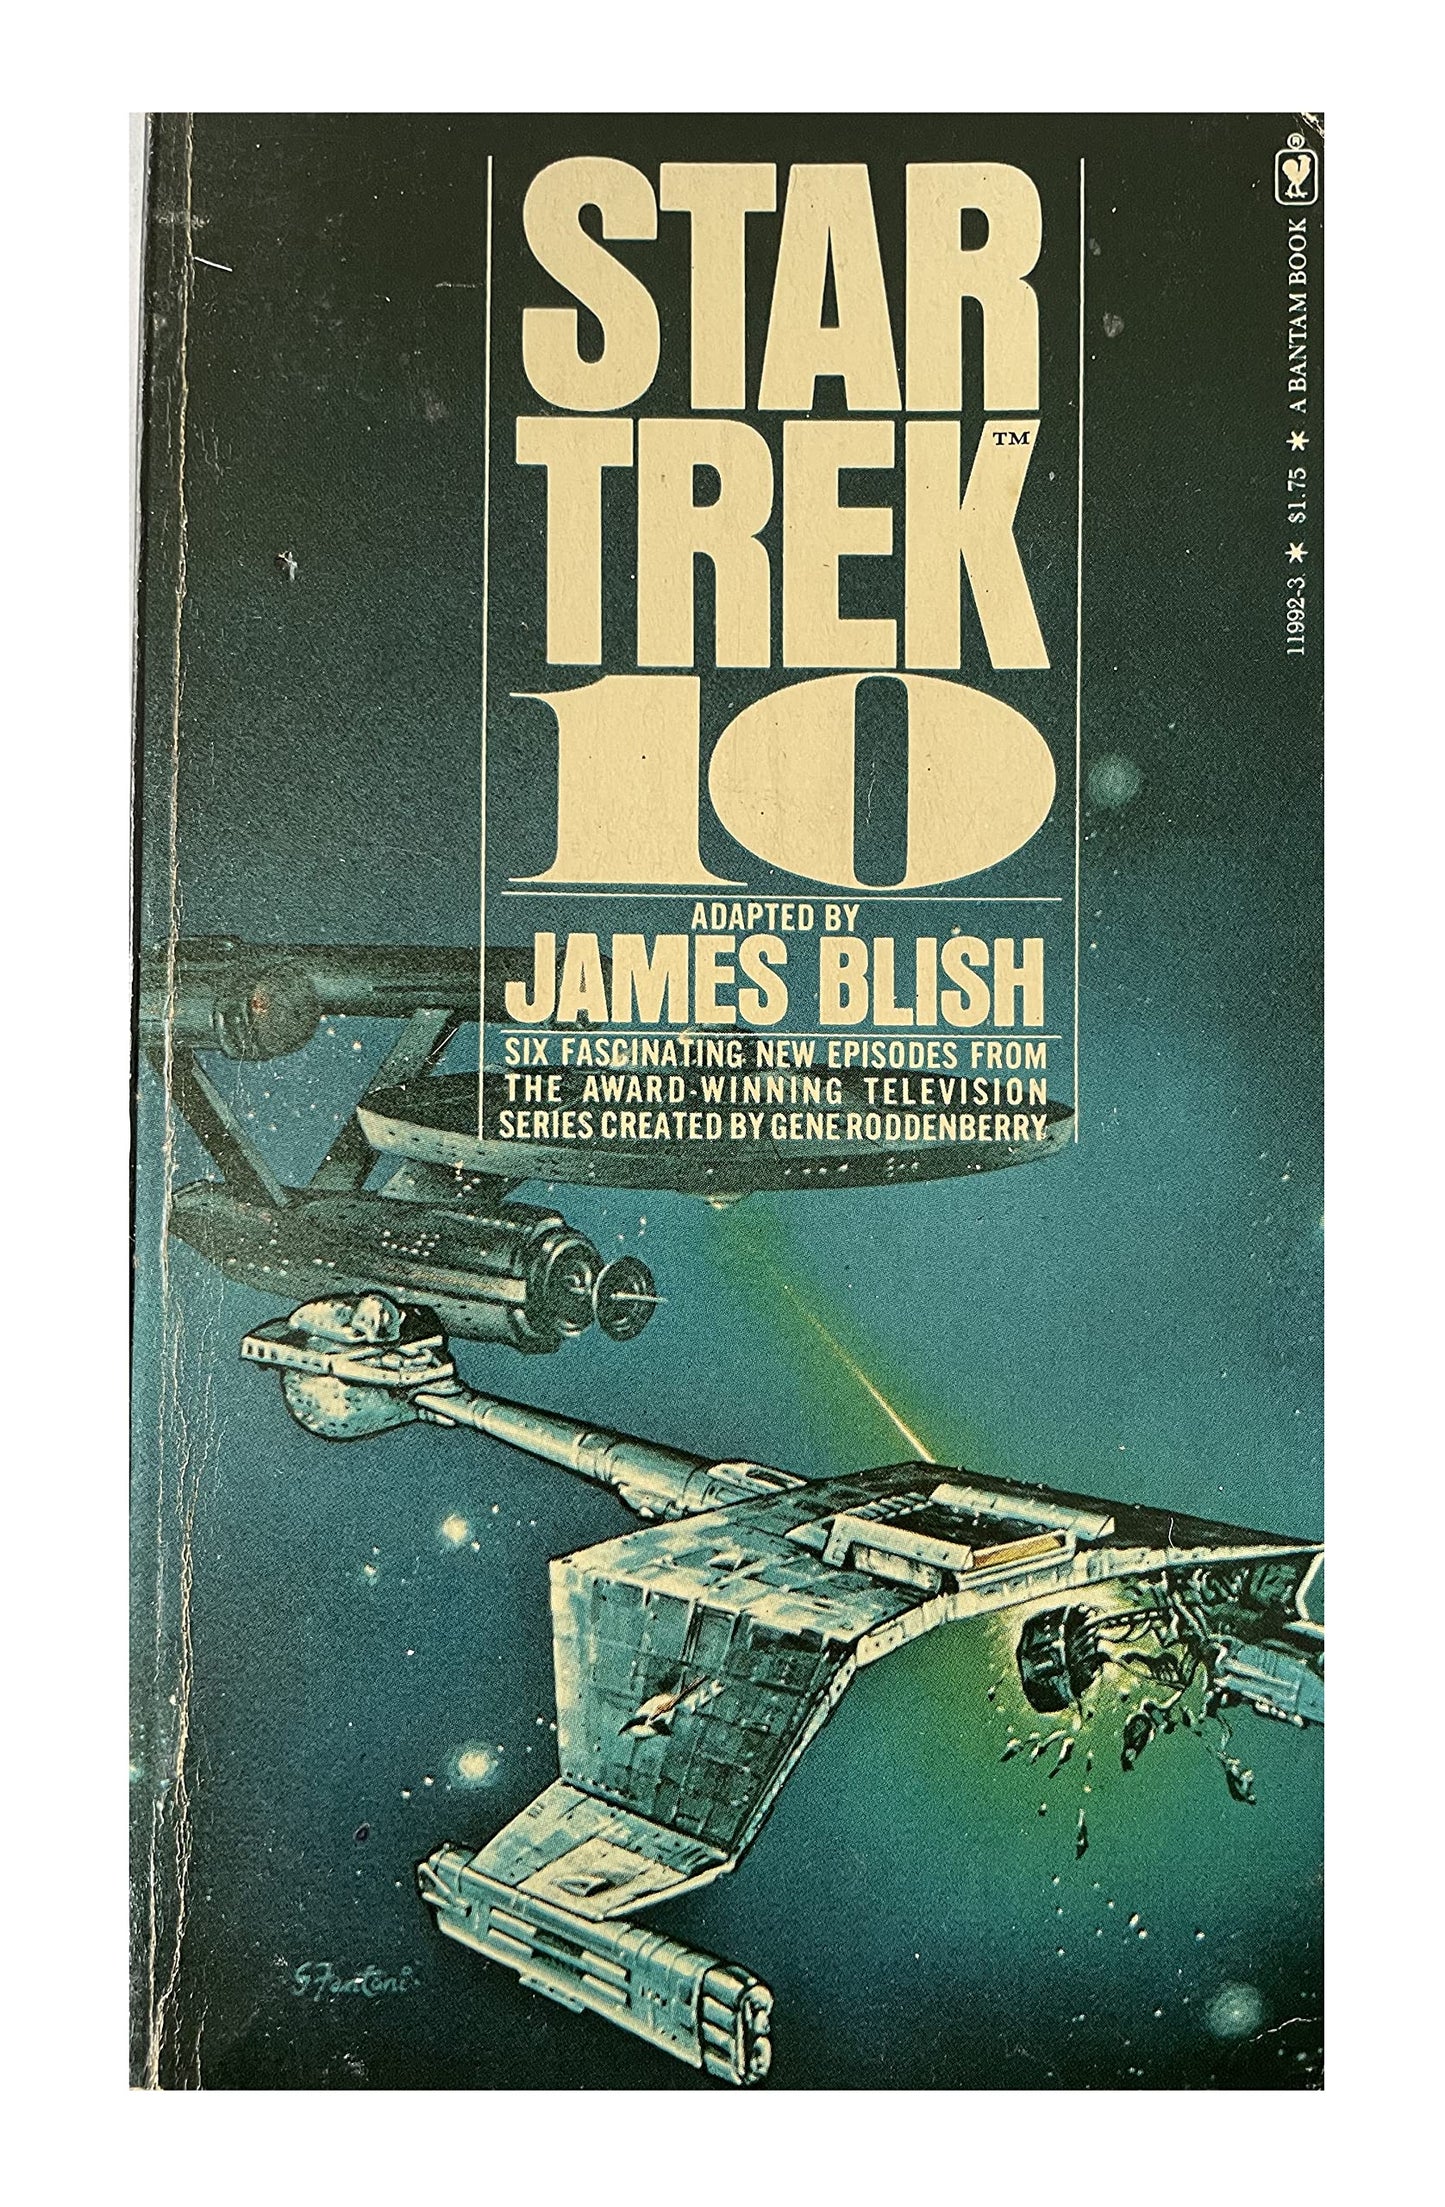 Vintage 1978 Star Trek 10 - Adapted From The Original Television Series - Paperback Book - By James Blish